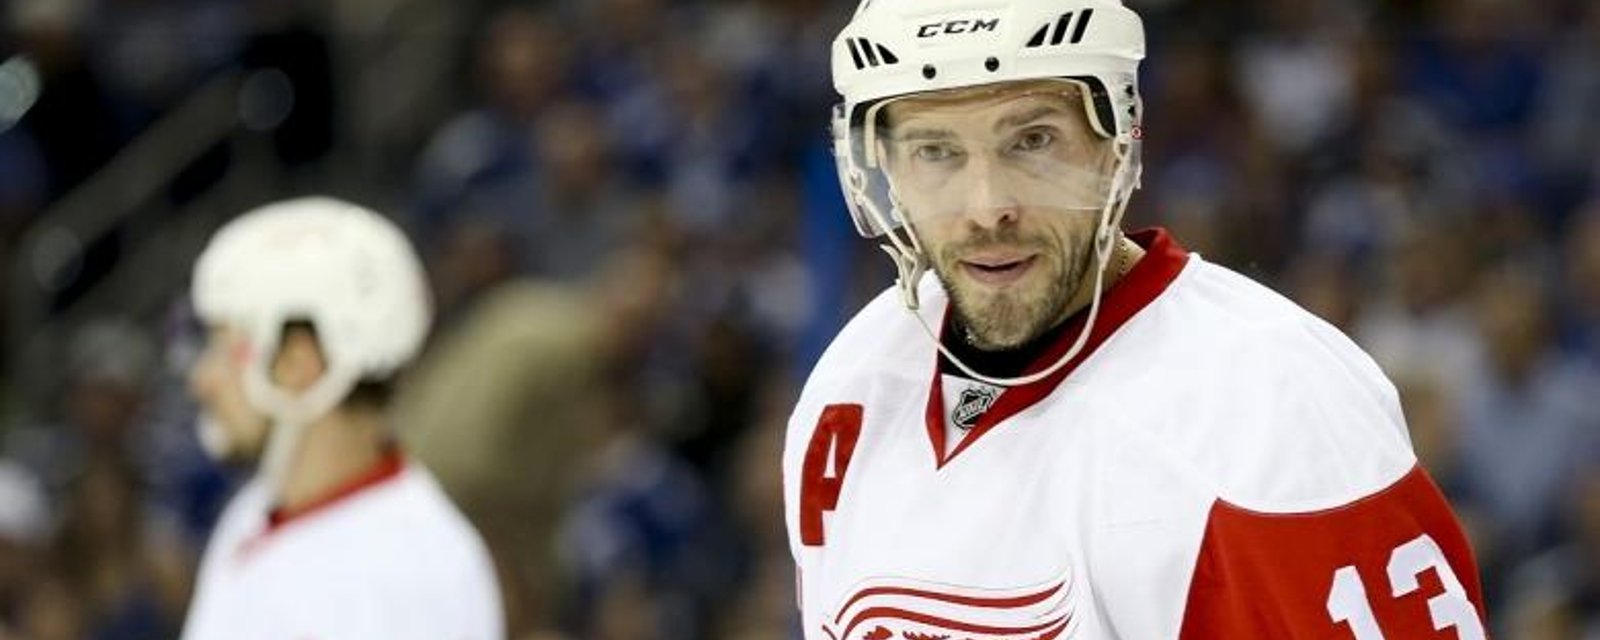 Datsyuk's departure could leave the Red Wings with a very valuable trading chip.